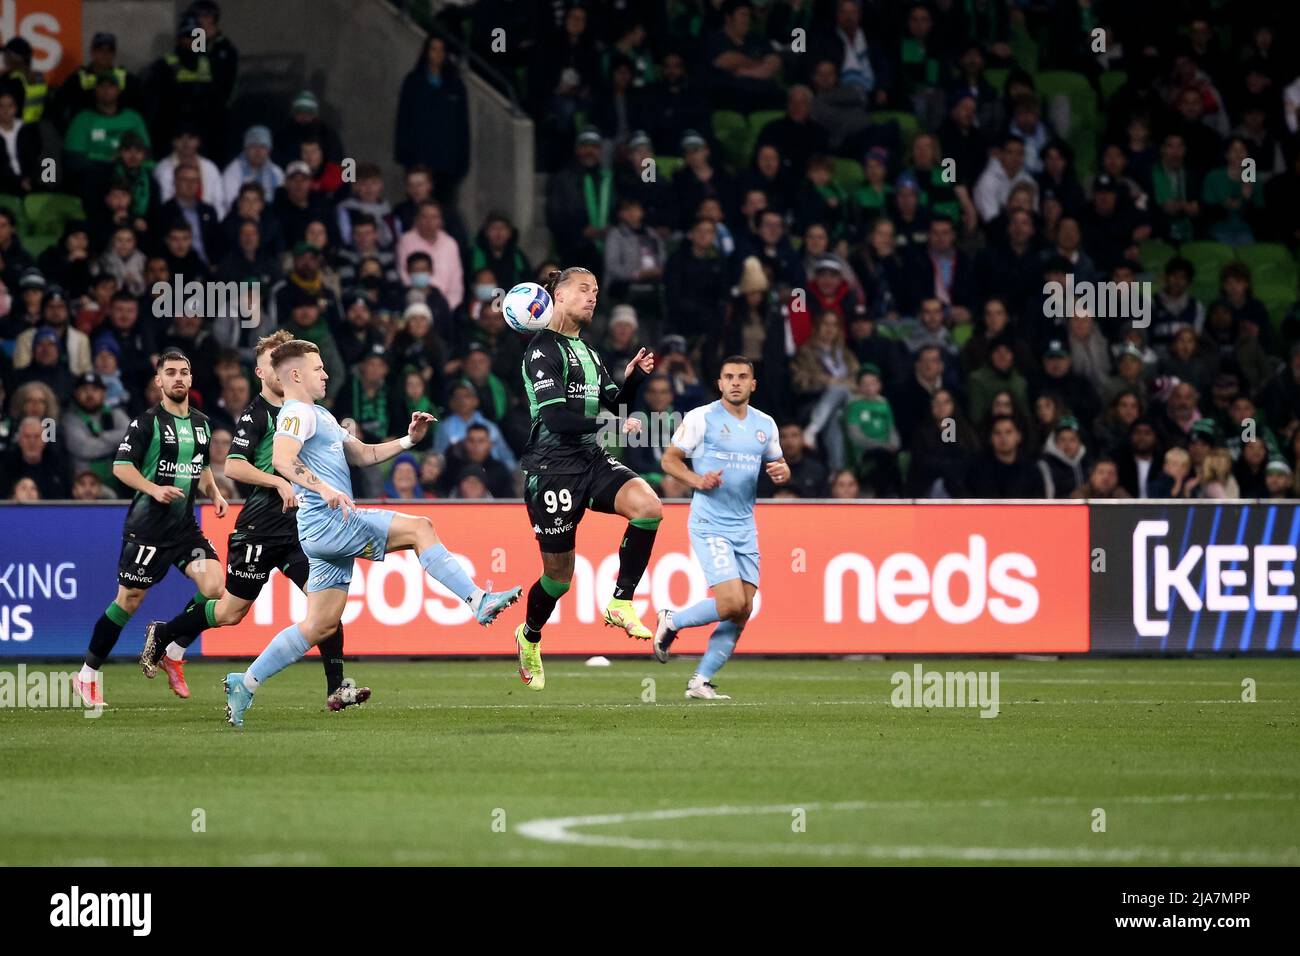 Melbourne, Australia, 28 May, 2022. Aleksandar Prijovic of Western United heads the ball during the A-League Grand Final soccer match between Melbourne City FC and Western United at AAMI Park on May 28, 2022 in Melbourne, Australia. Credit: Dave Hewison/Speed Media/Alamy Live News Stock Photo